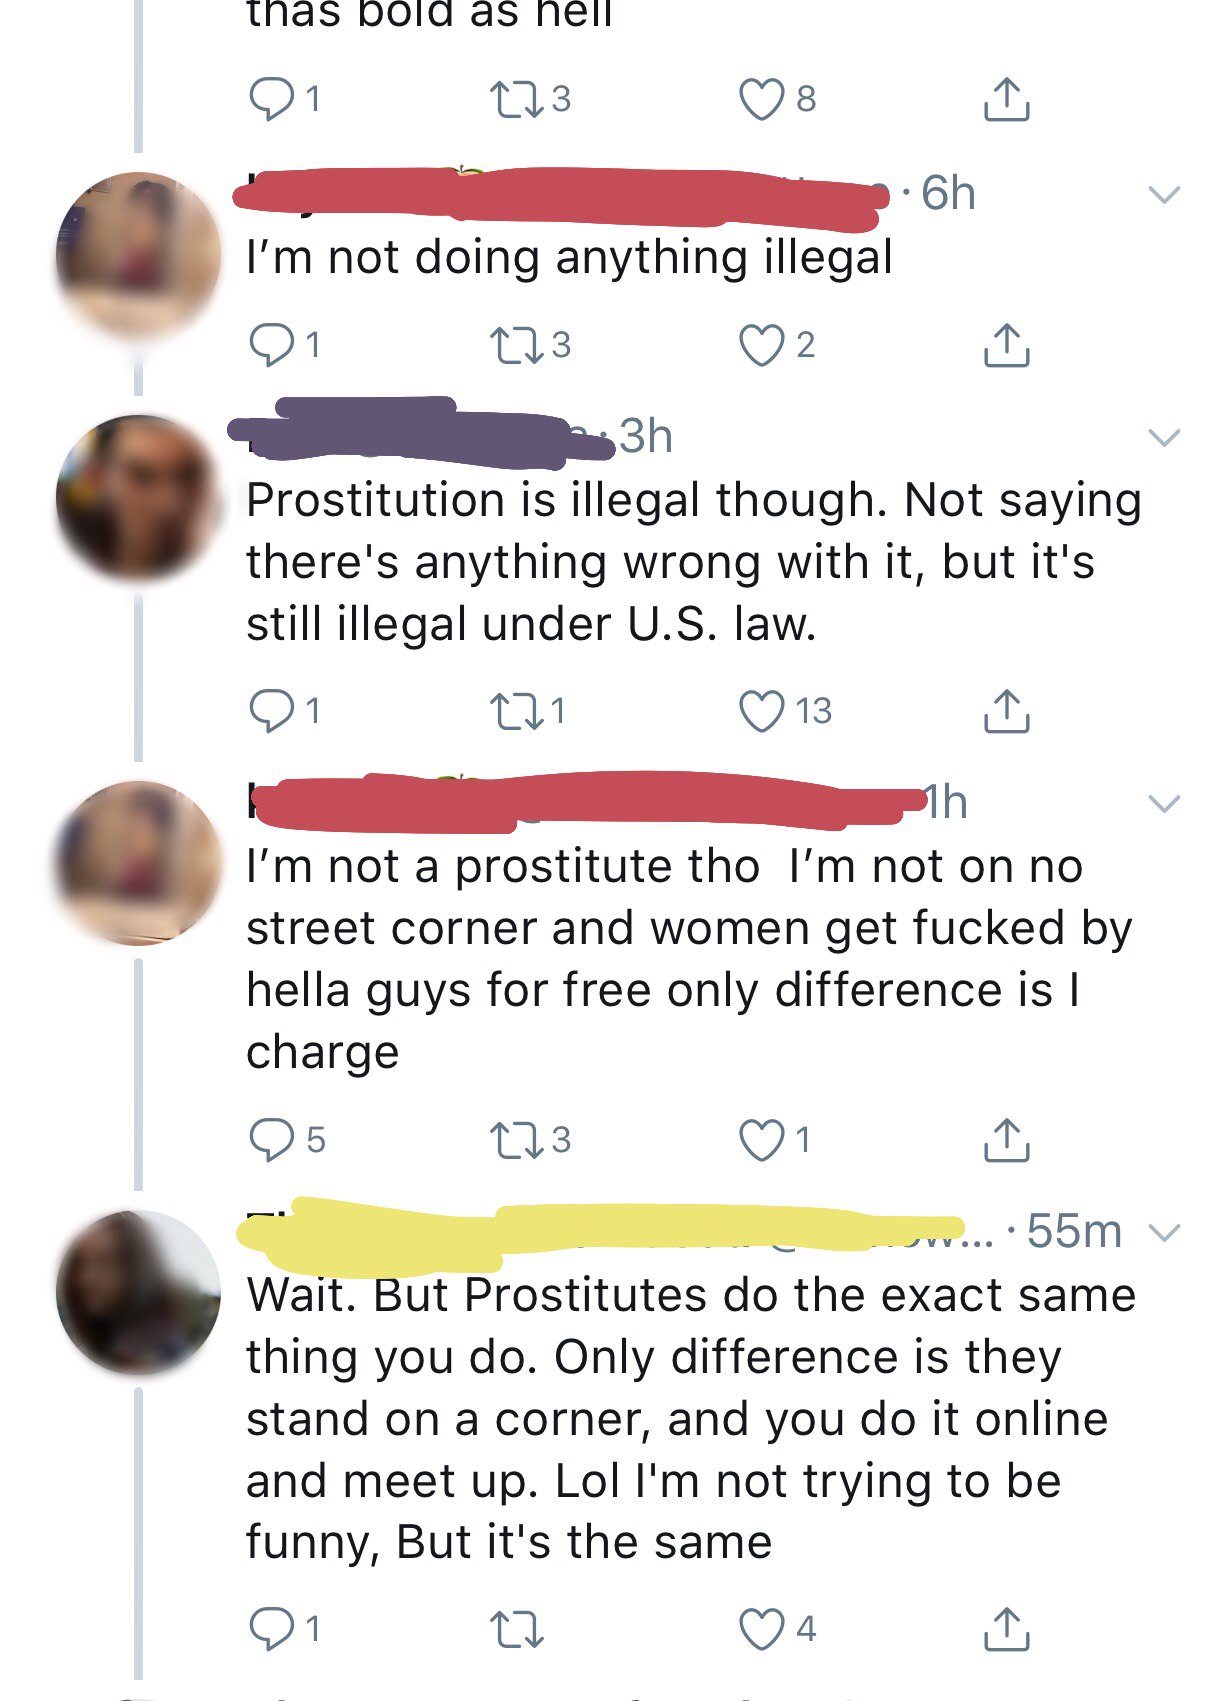 oblivious girl doesn t realize she's become - thas bold as hell Oi 223 o 1.6h I'm not doing anything illegal 01 273 02 3h Prostitution is illegal though. Not saying there's anything wrong with it, but it's still illegal under U.S. law. 01 221 13 21h I'm n